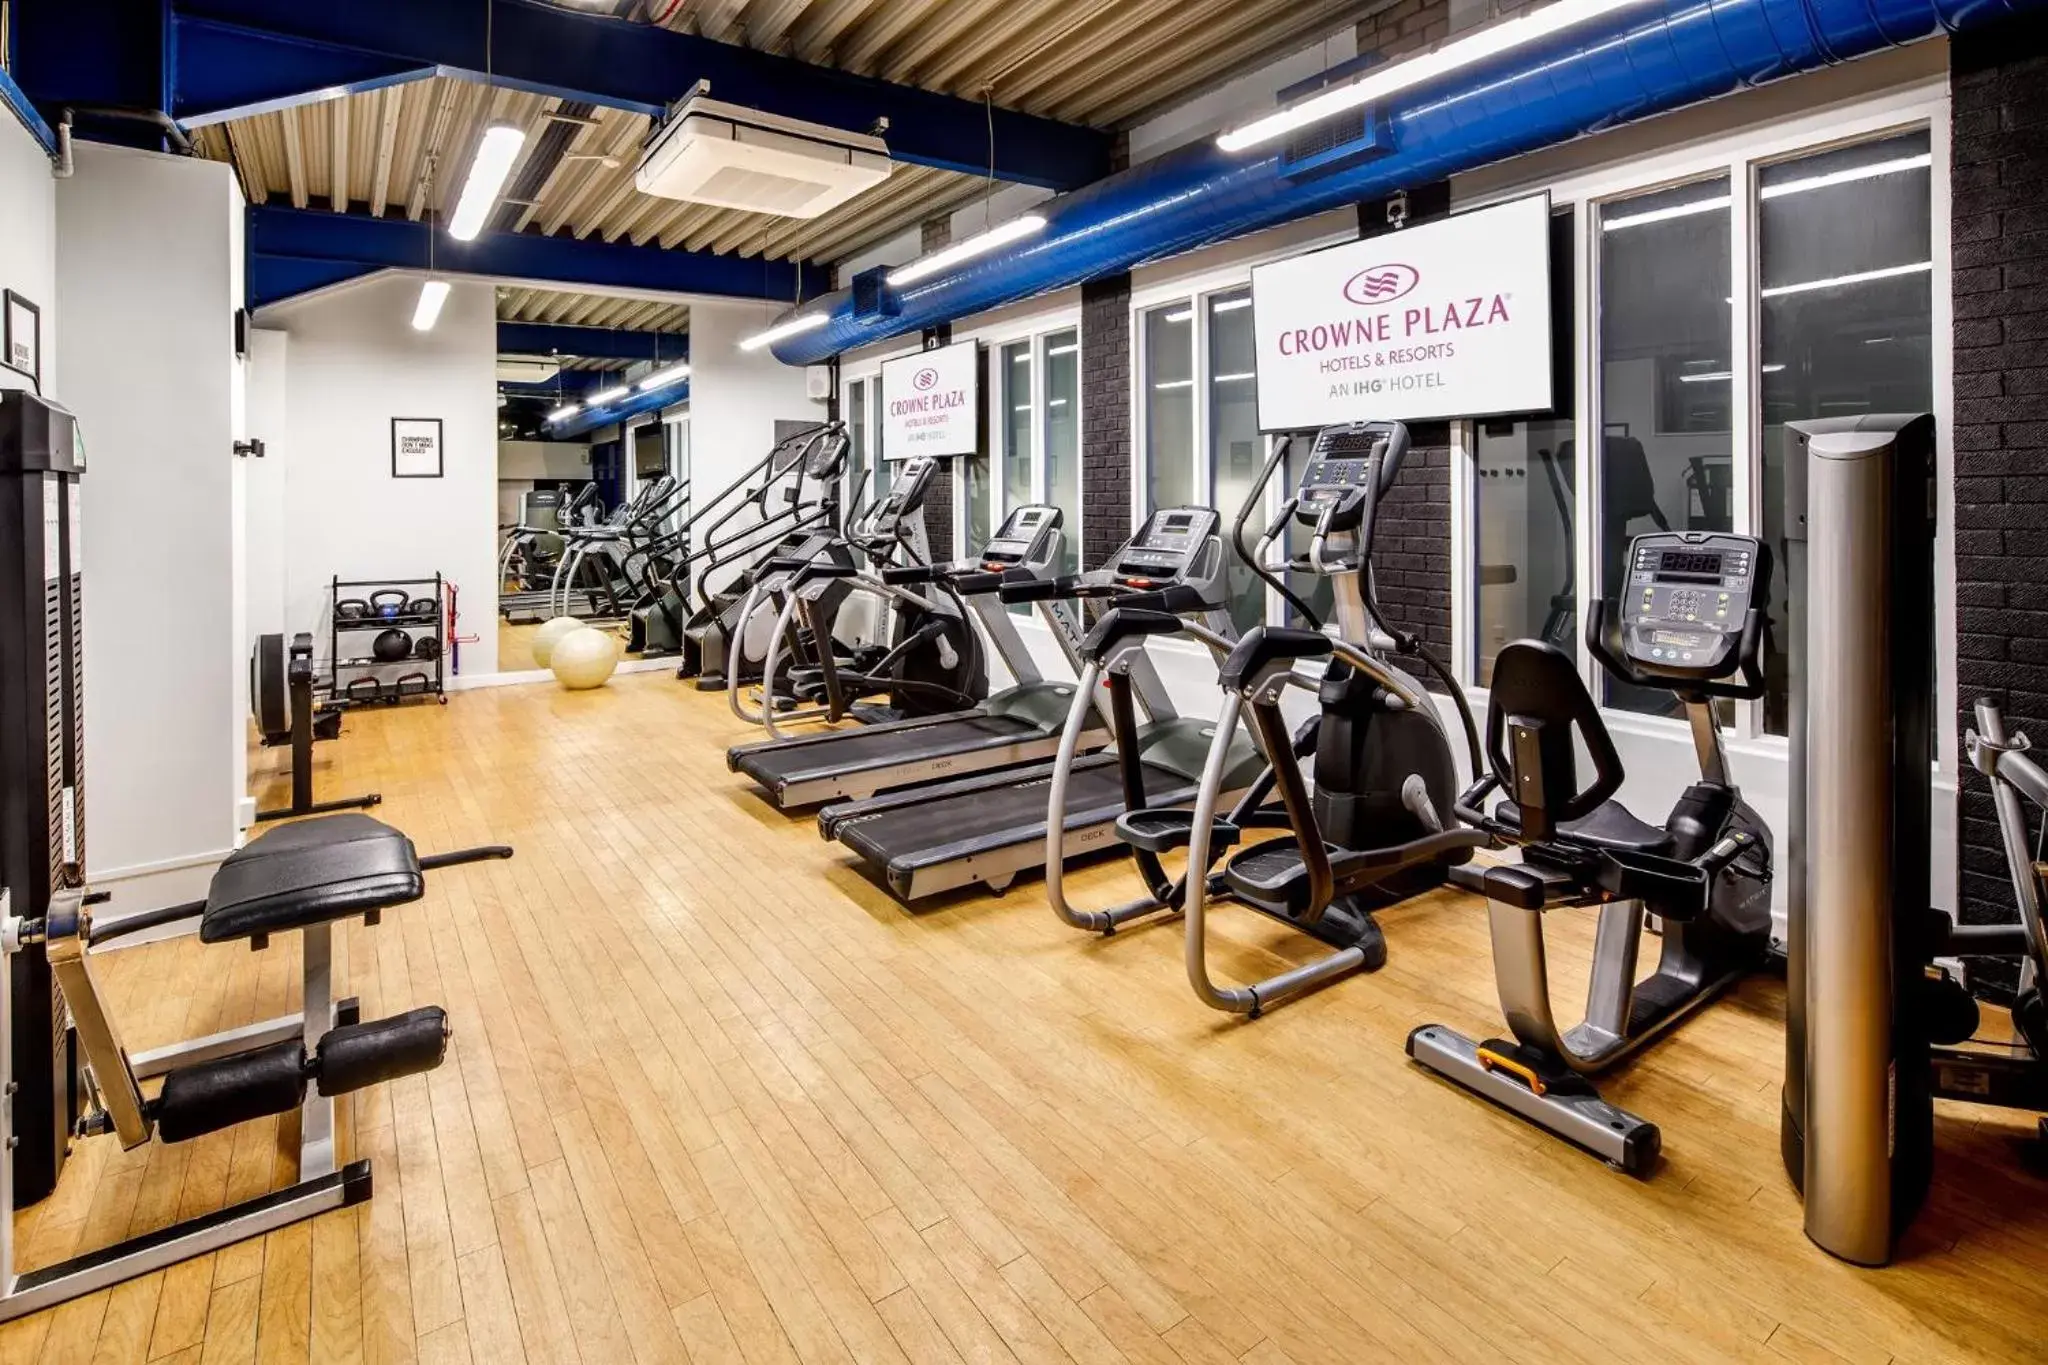 Fitness centre/facilities, Fitness Center/Facilities in Crowne Plaza Manchester Airport